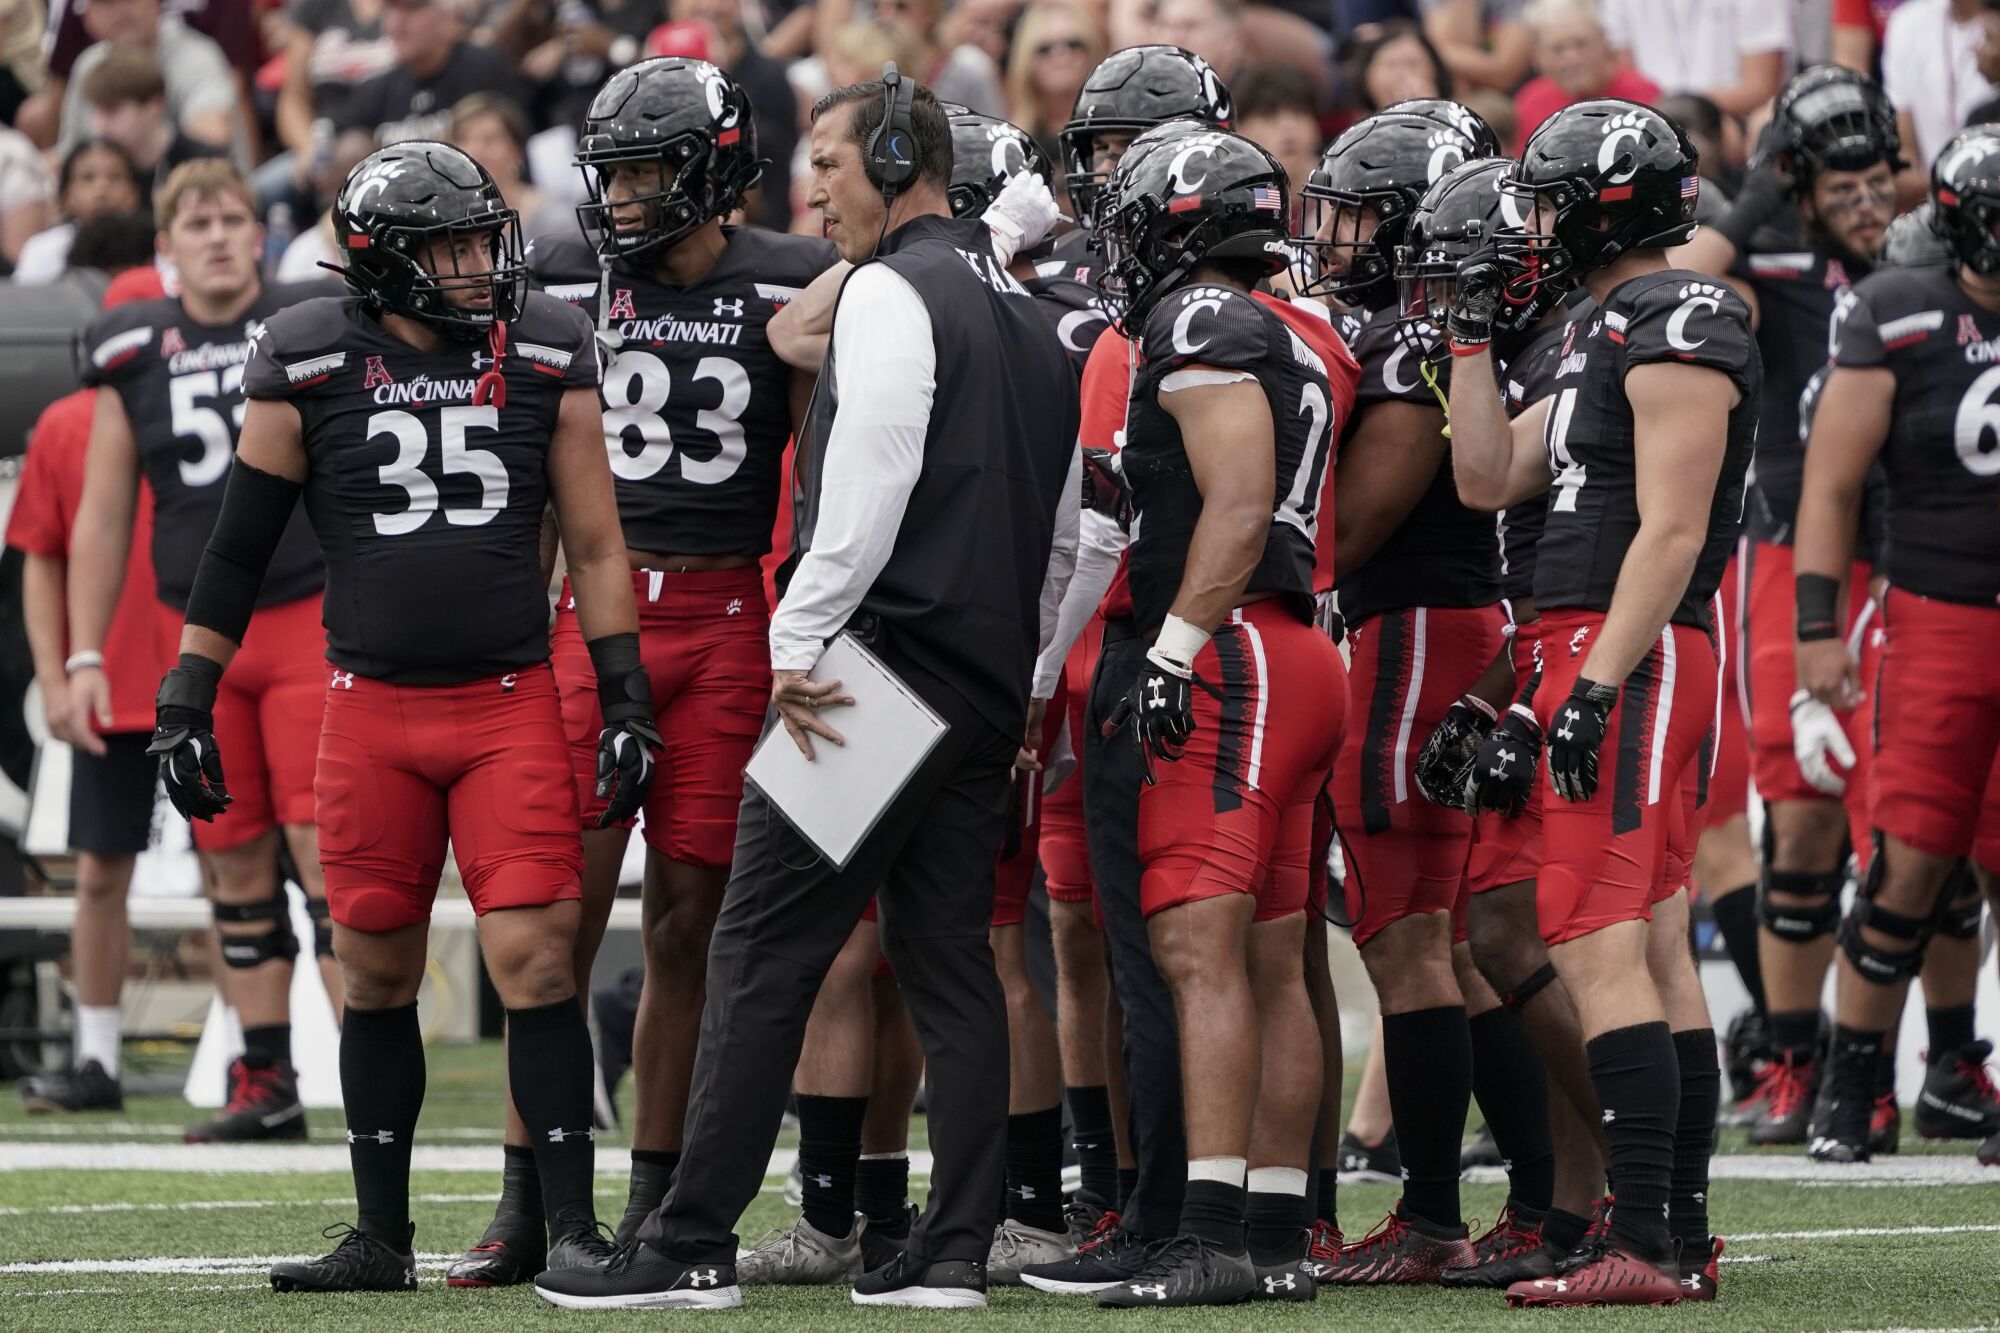 Cincinnati coach Luke Fickell speaks with his team on the sideline during a game against Miami (Ohio) 